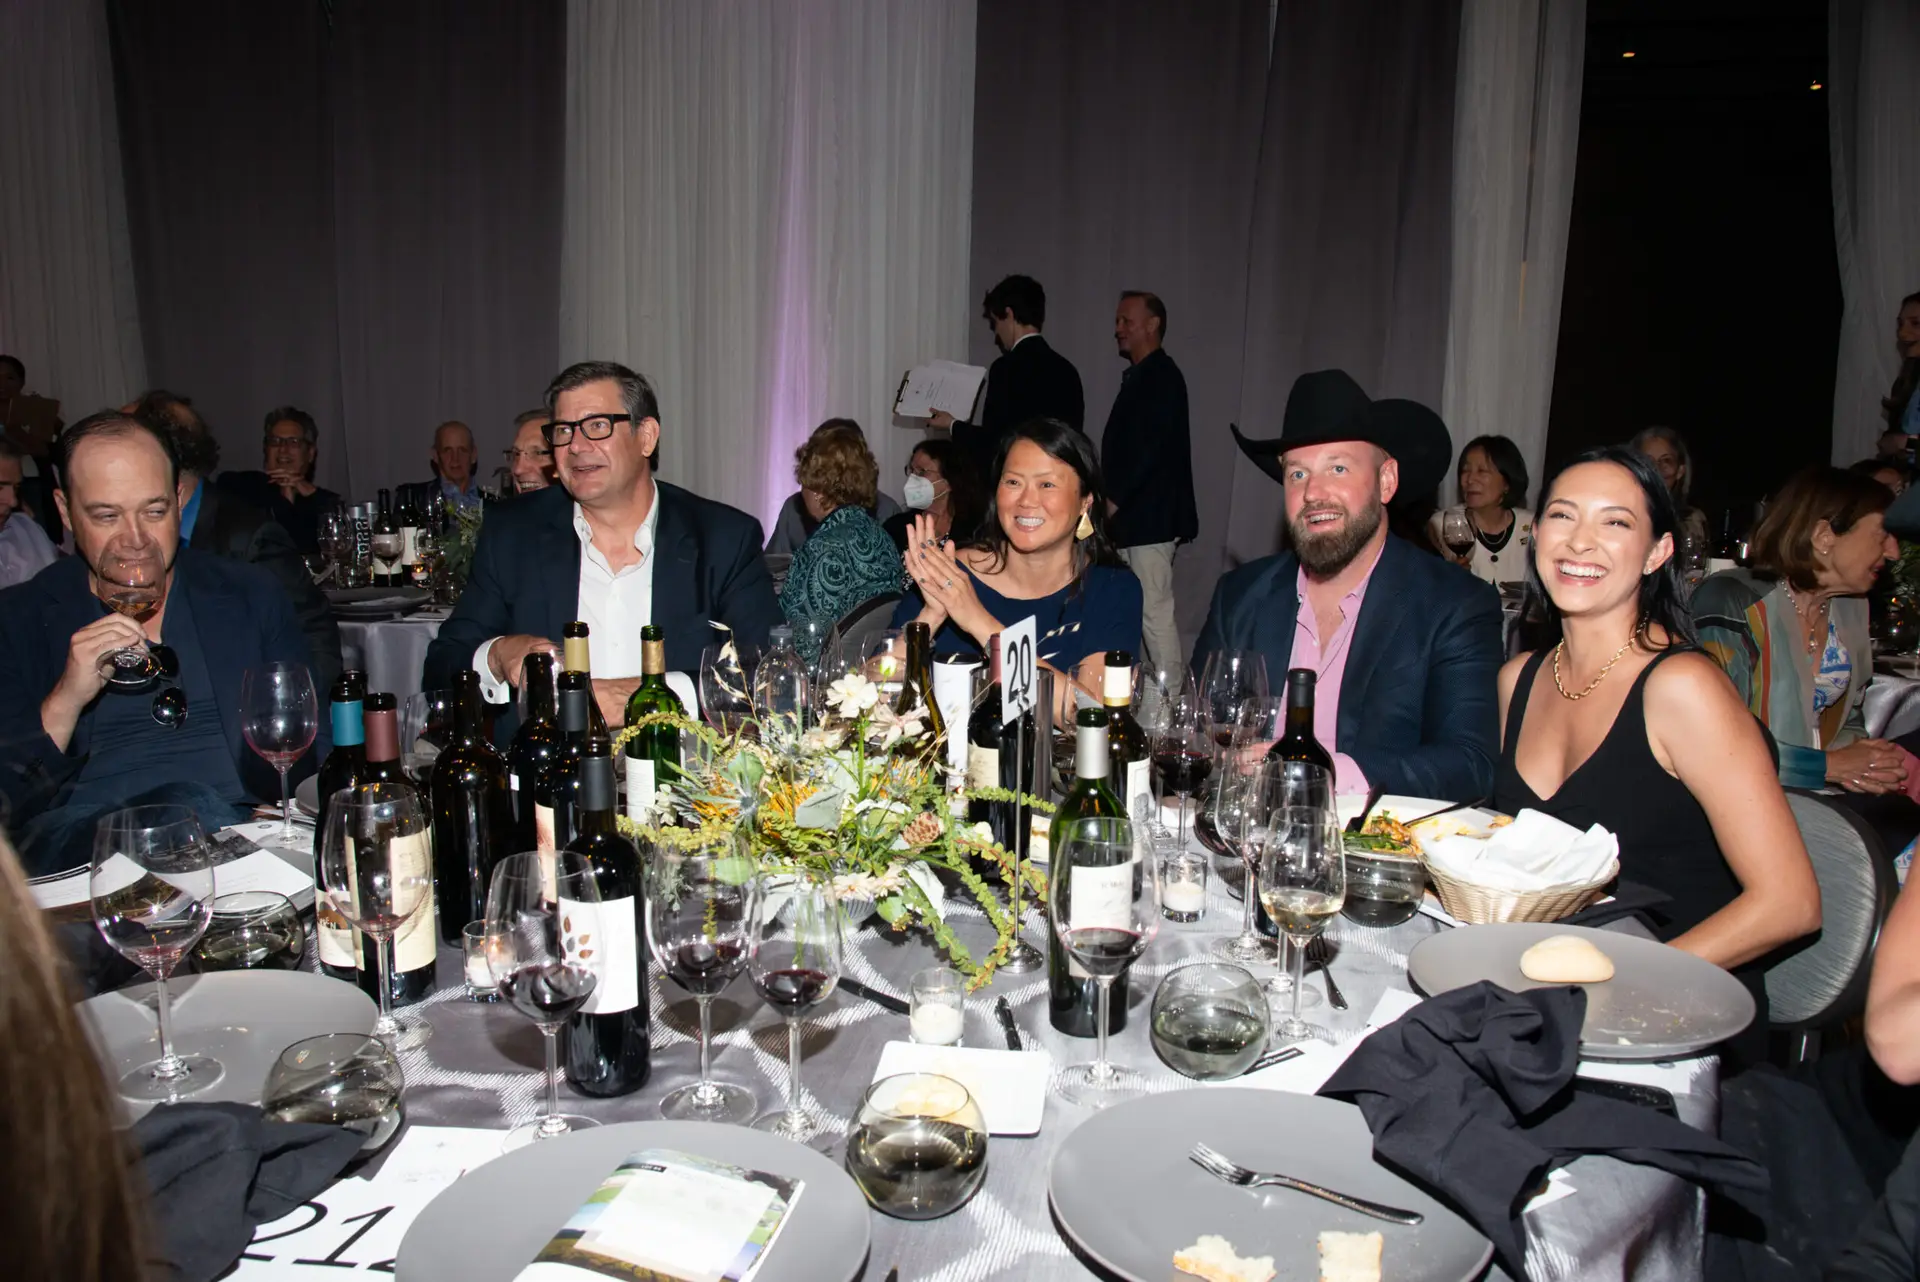 Guests sit at table for Inspire Napa Valley gala.